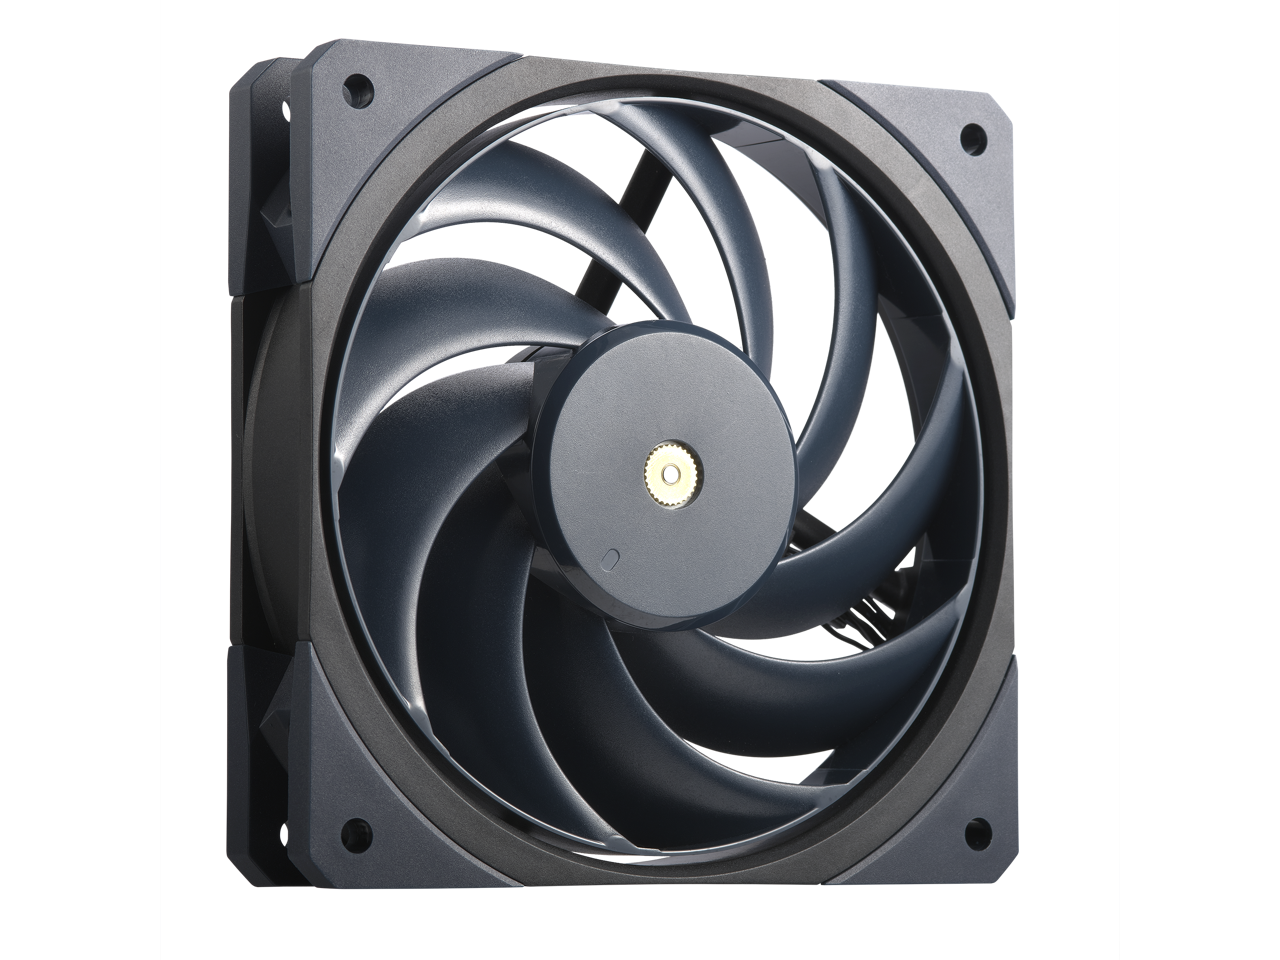 Cooler Master Mobius 120 OC High Performance Interconnecting Ring Blade Fan, PWM Fan Speed Cable Toggle, Metal Motor Hub, Double Ball Bearing for PC Case, Liquid and Air Cooler (MFZ-M2NN-32NPK-R1)